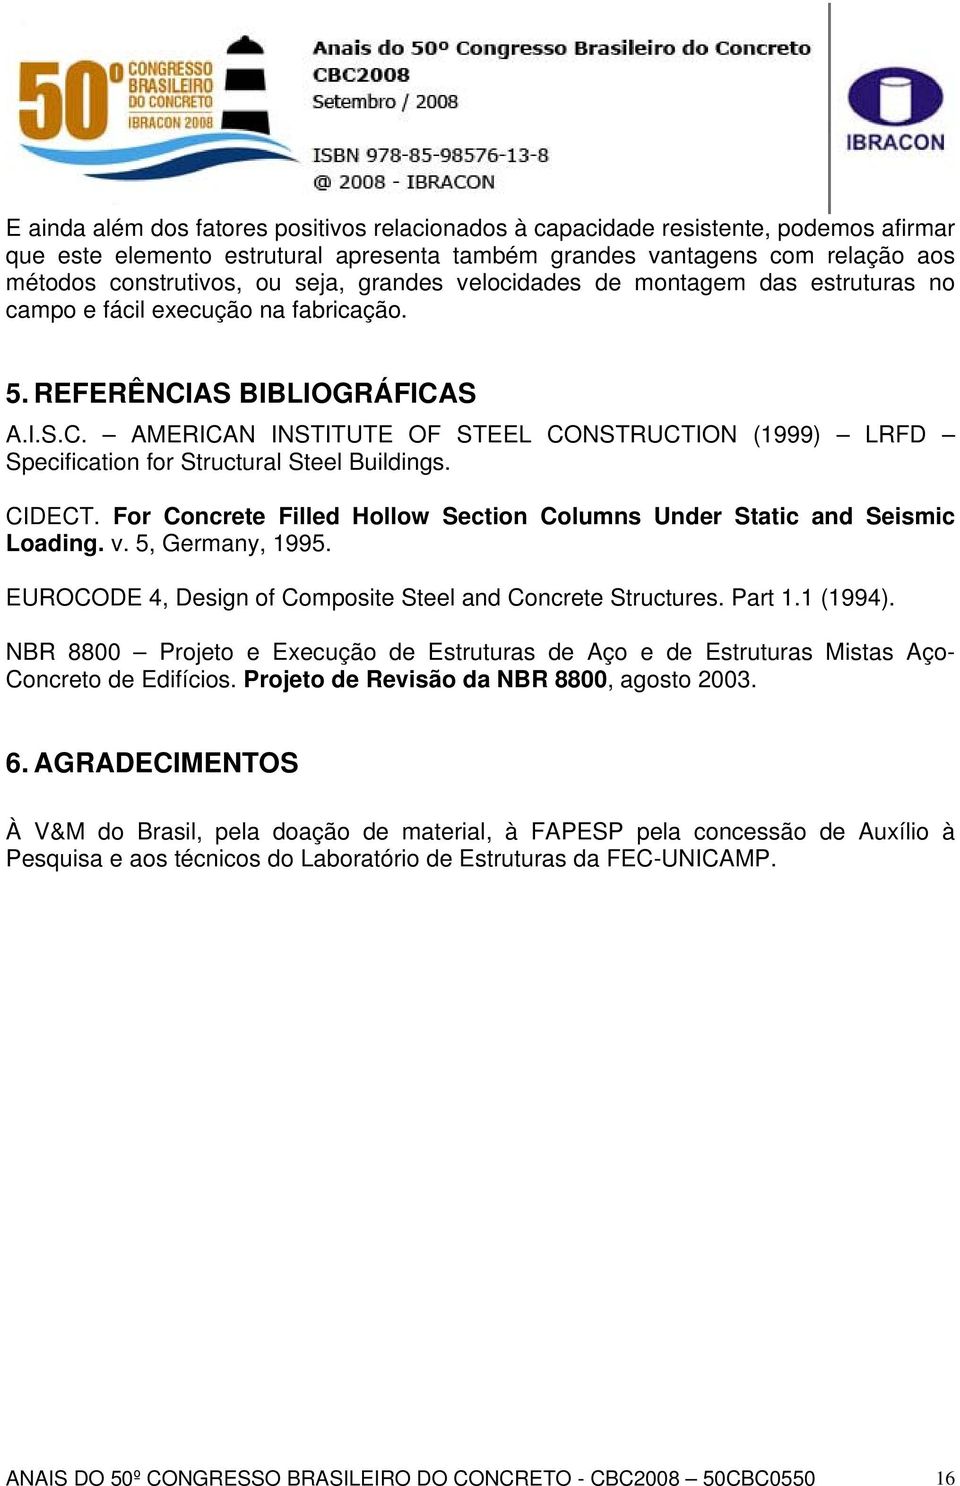 CIDECT. For Concrete Filled Hollow Section Columns Under Static and Seismic Loading. v. 5, Germany, 1995. EUROCODE 4, Design of Composite Steel and Concrete Structures. Part 1.1 (1994).